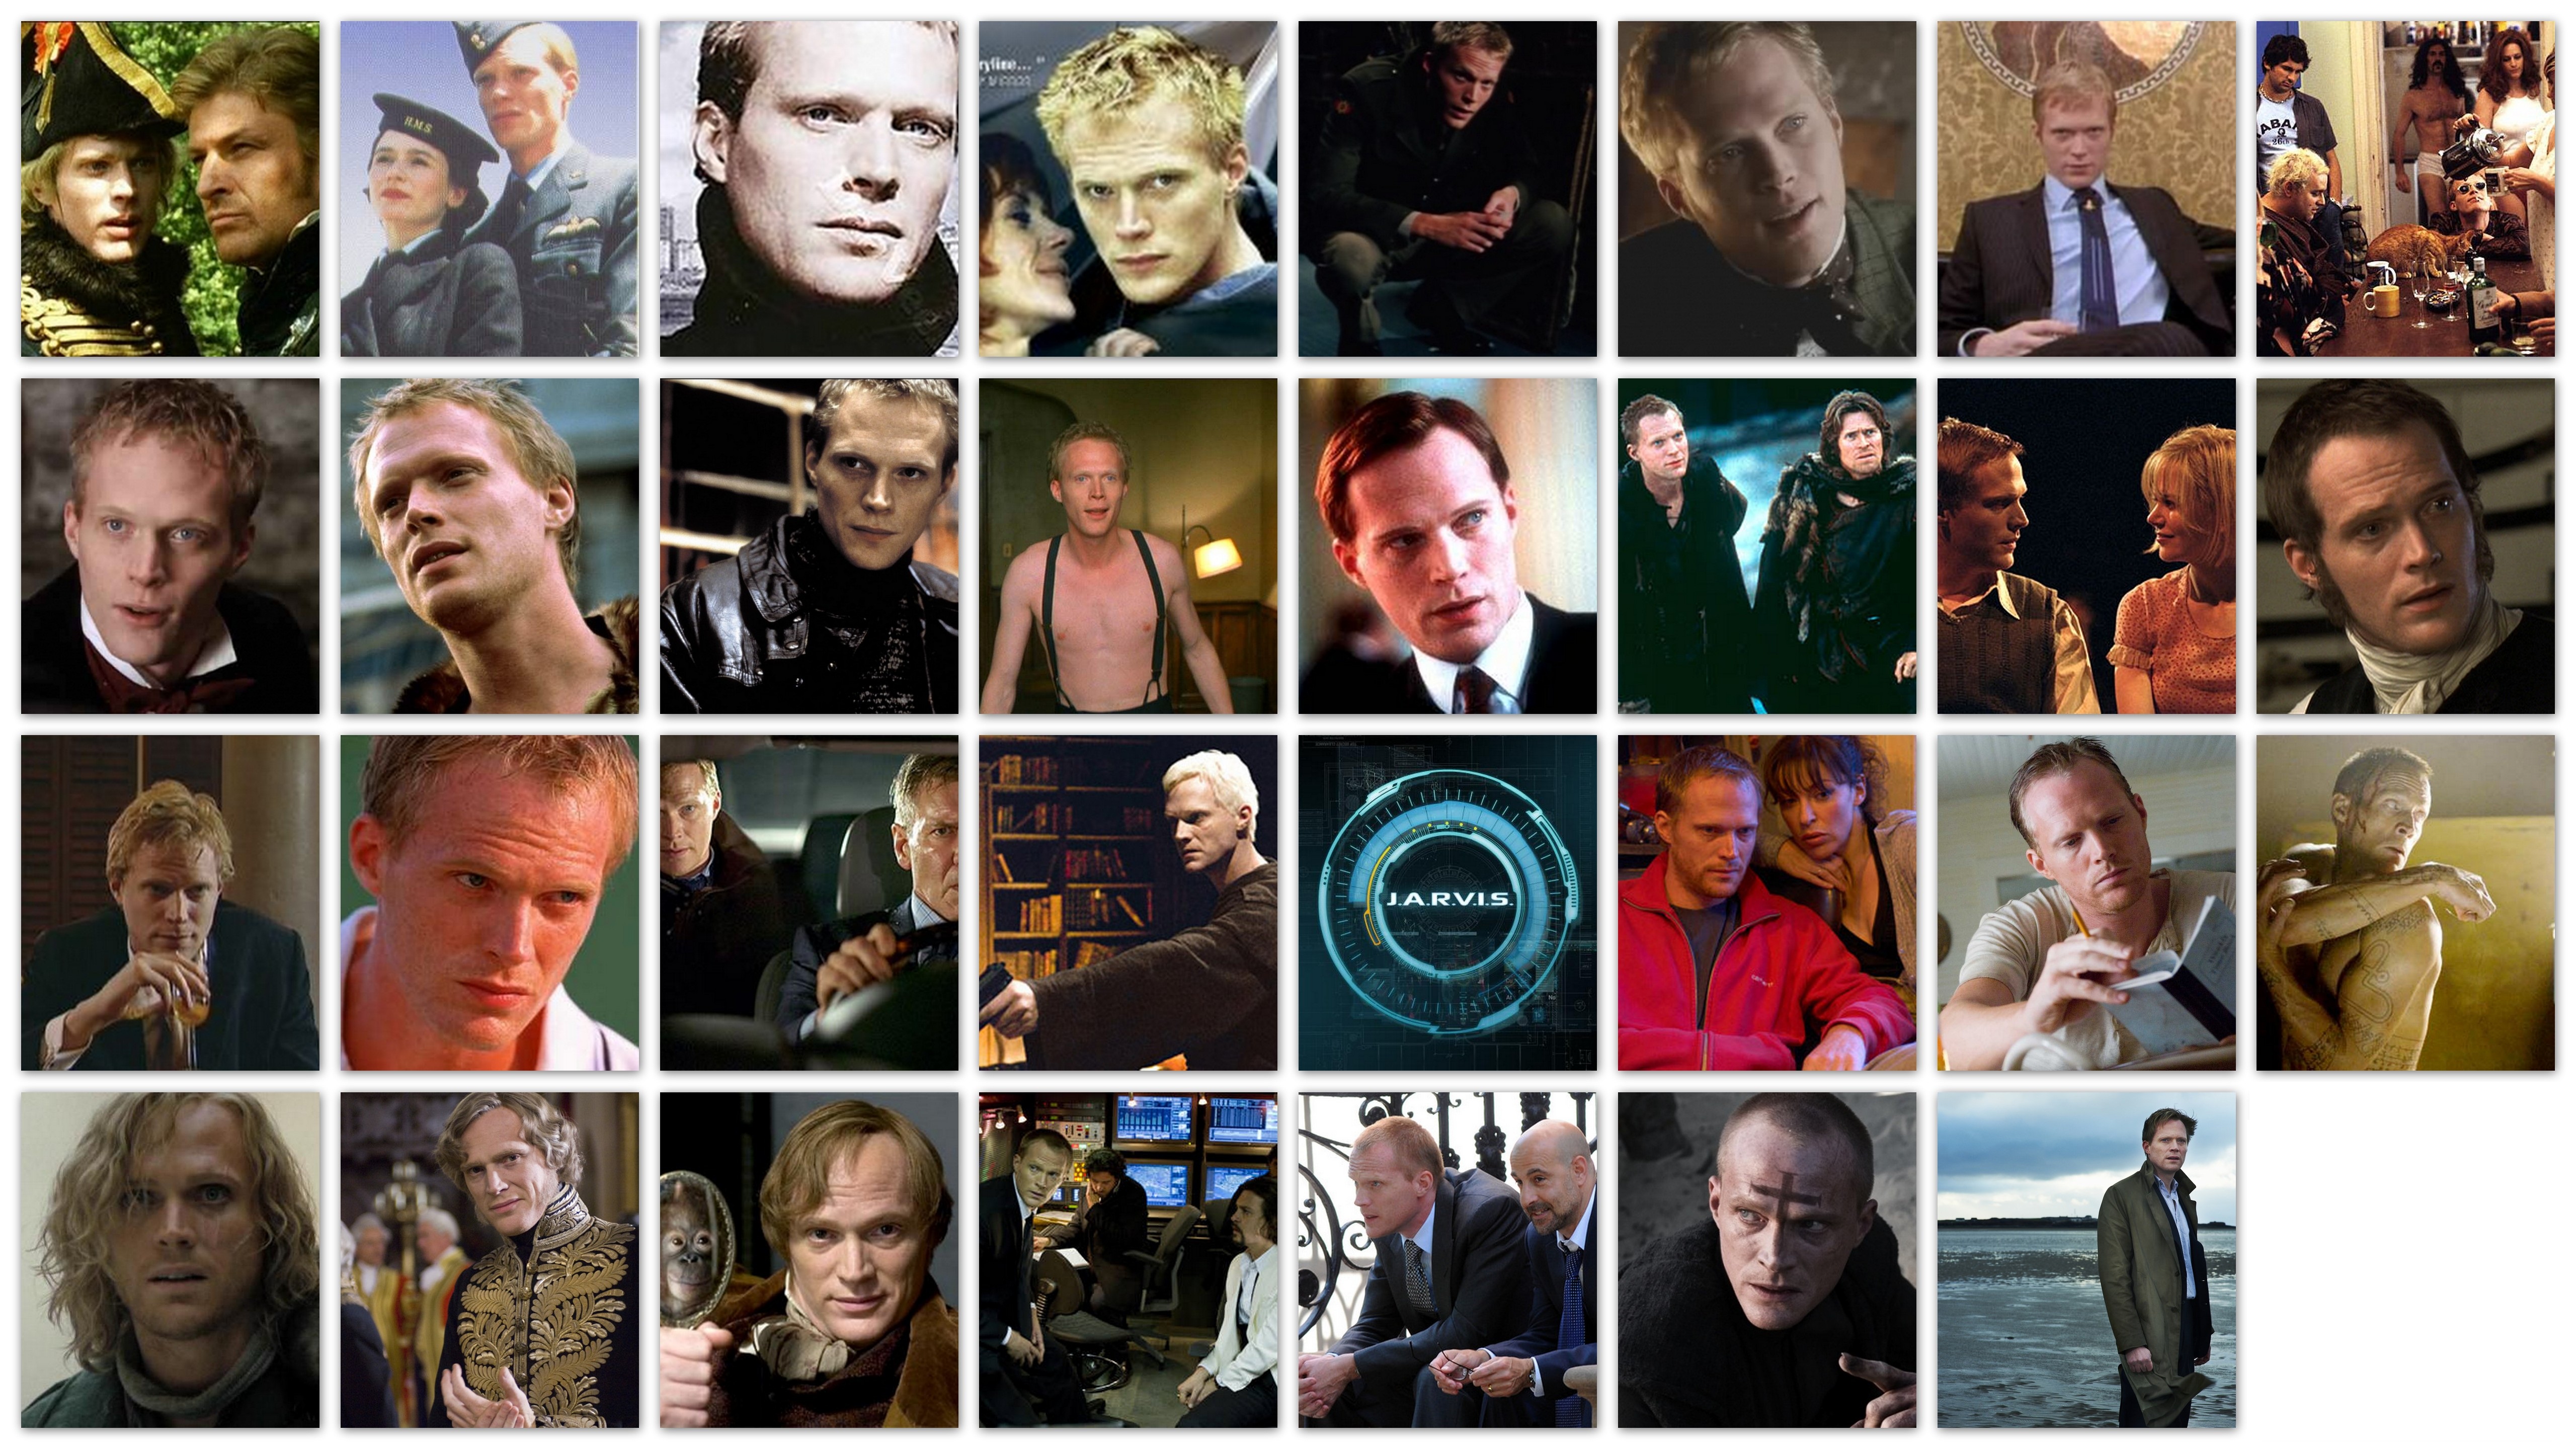 Overview of the roles of Paul Bettany in movies